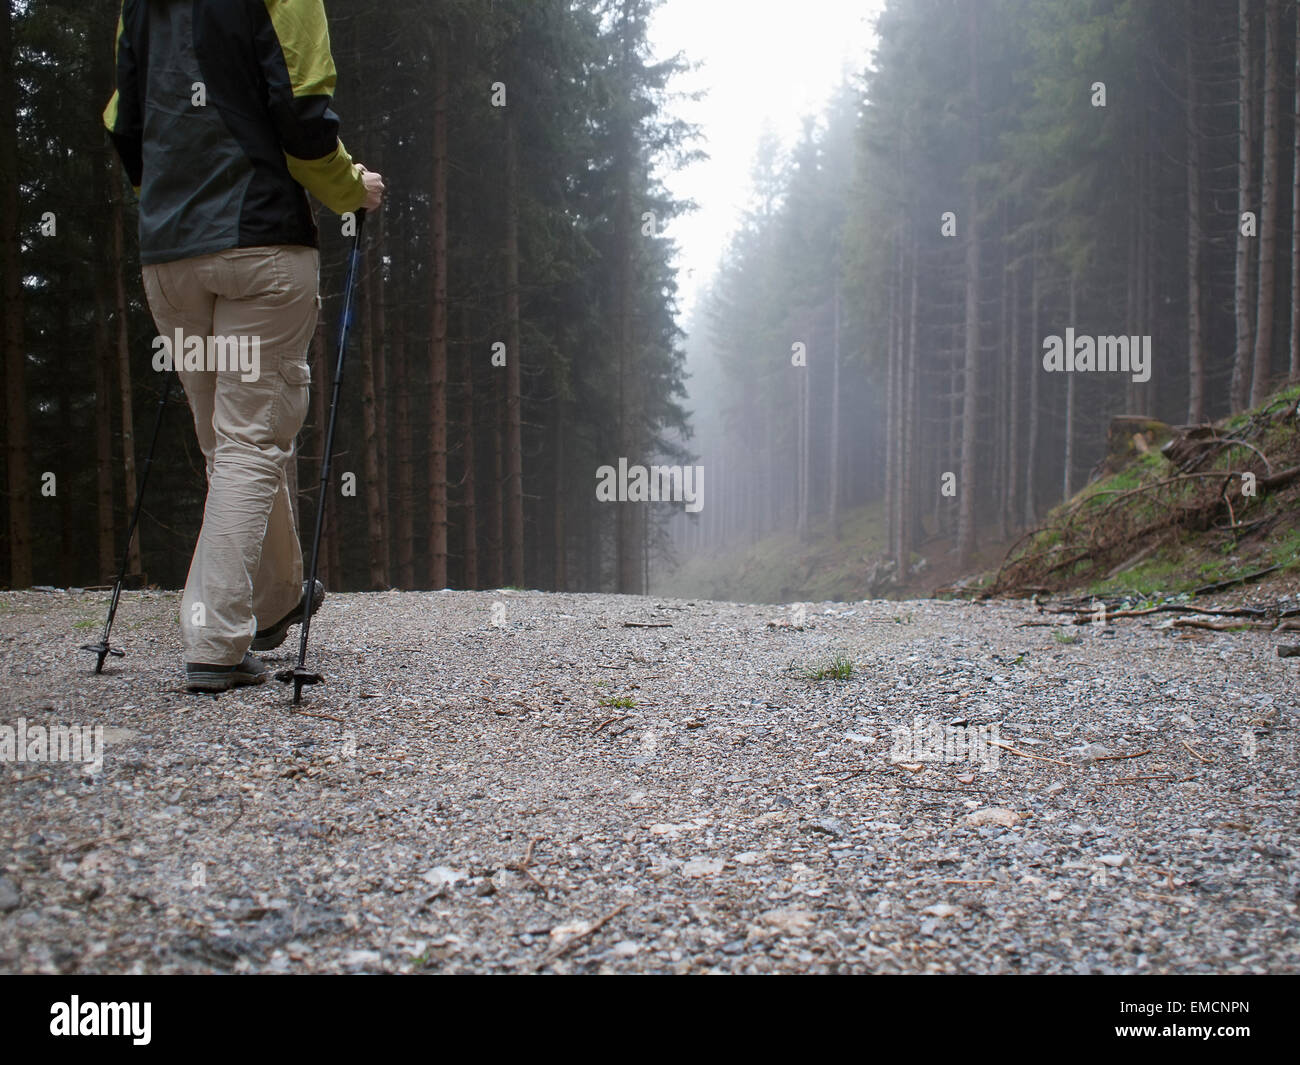 Austria, Maria Alm, female hiker walking on forest track Stock Photo